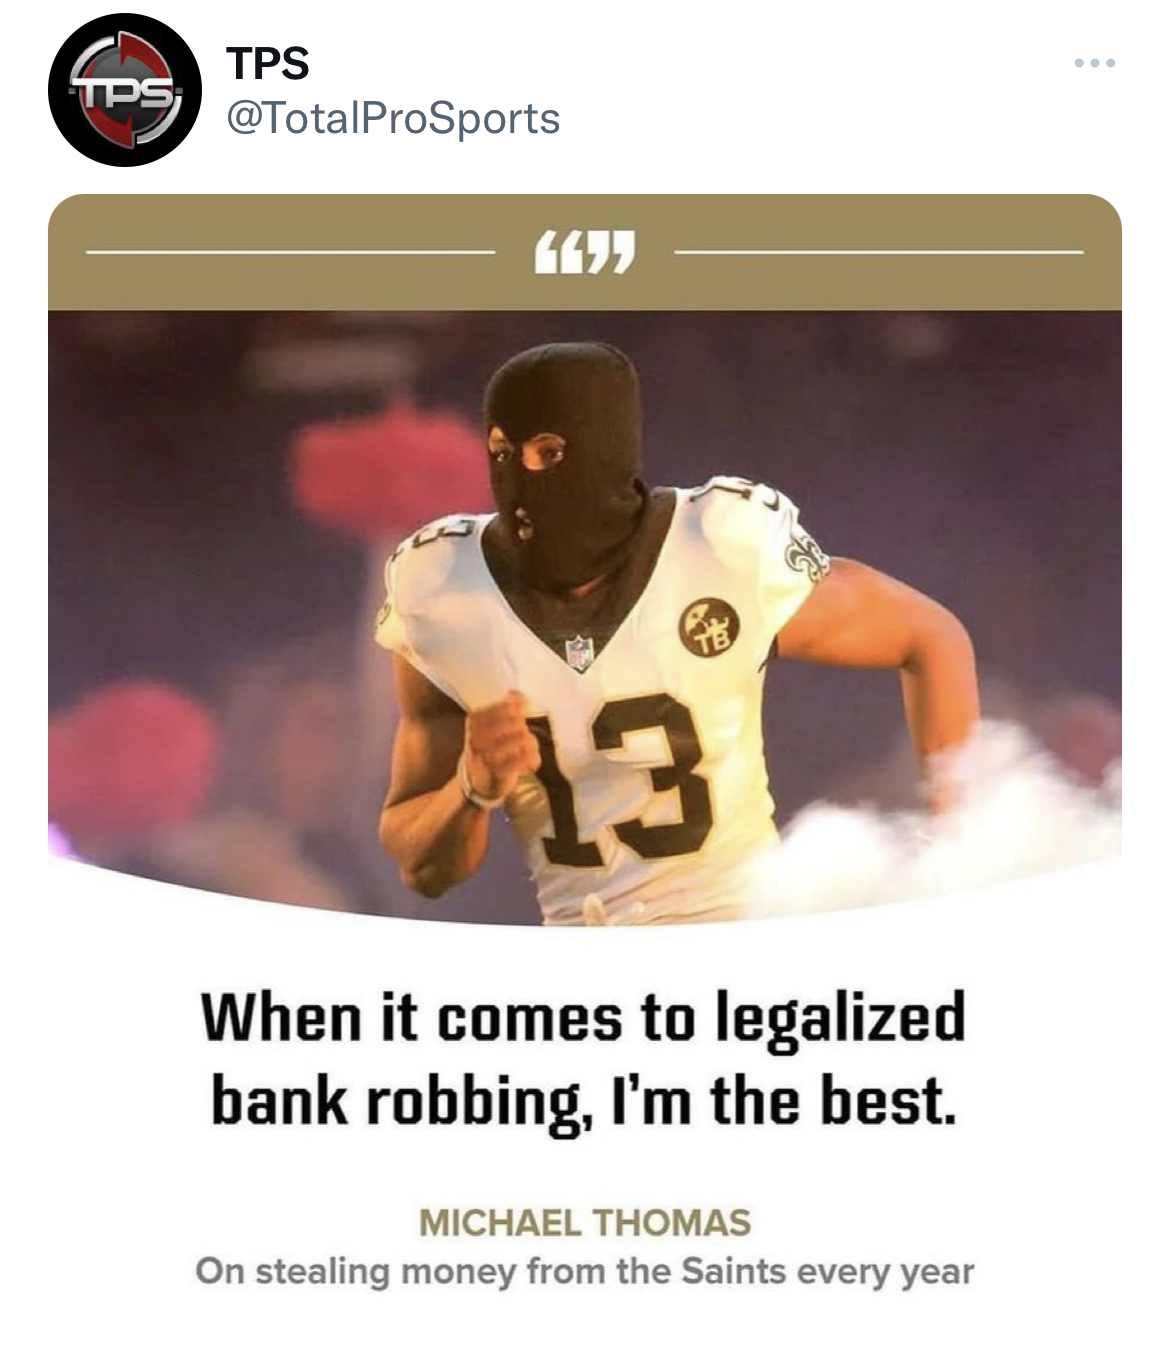 Celeb roasts of the week - saints ski mask - Tps Tps 13 When it comes to legalized bank robbing, I'm the best. Michael Thomas On stealing money from the Saints every year